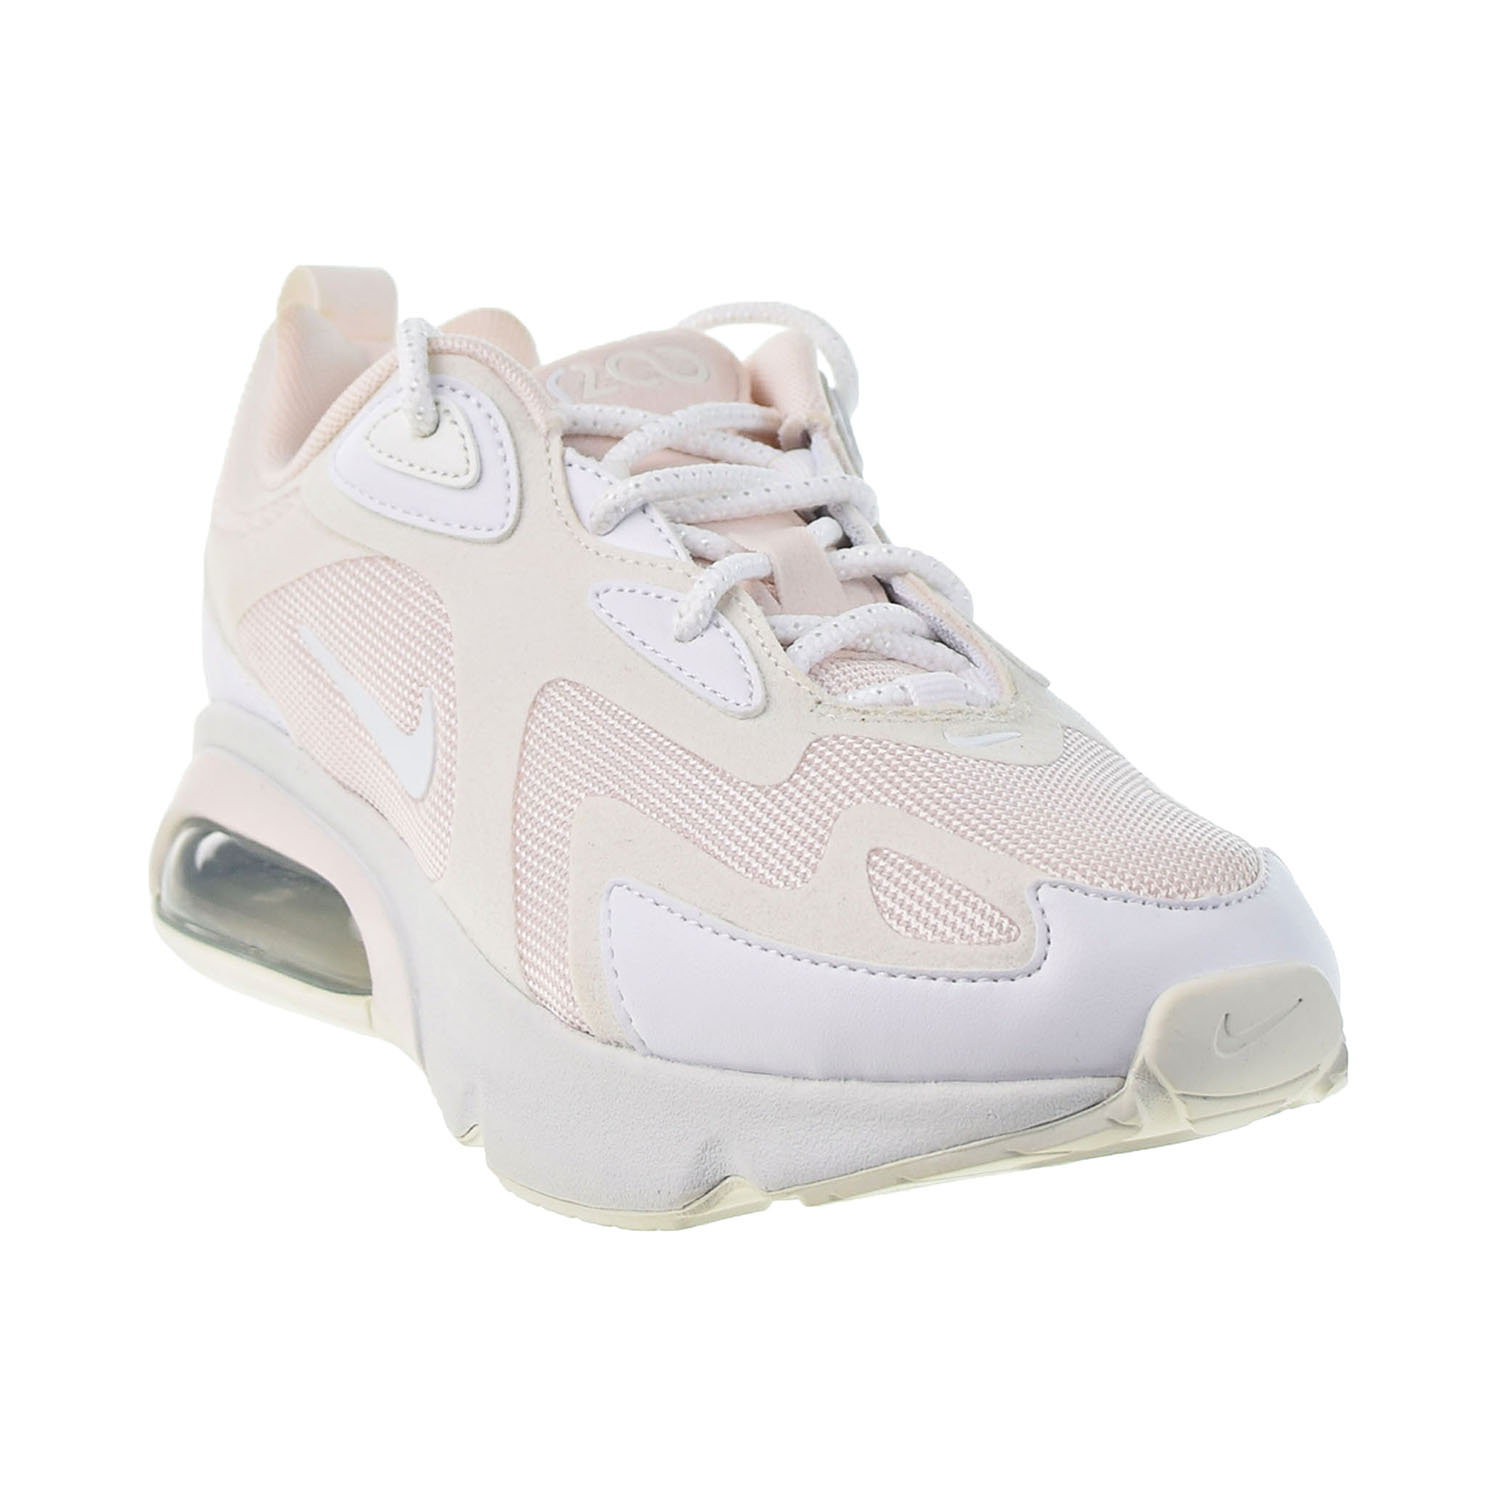 Nike Air pink air max Max 200 Women's Shoes Light Soft Pink-White at6175-600